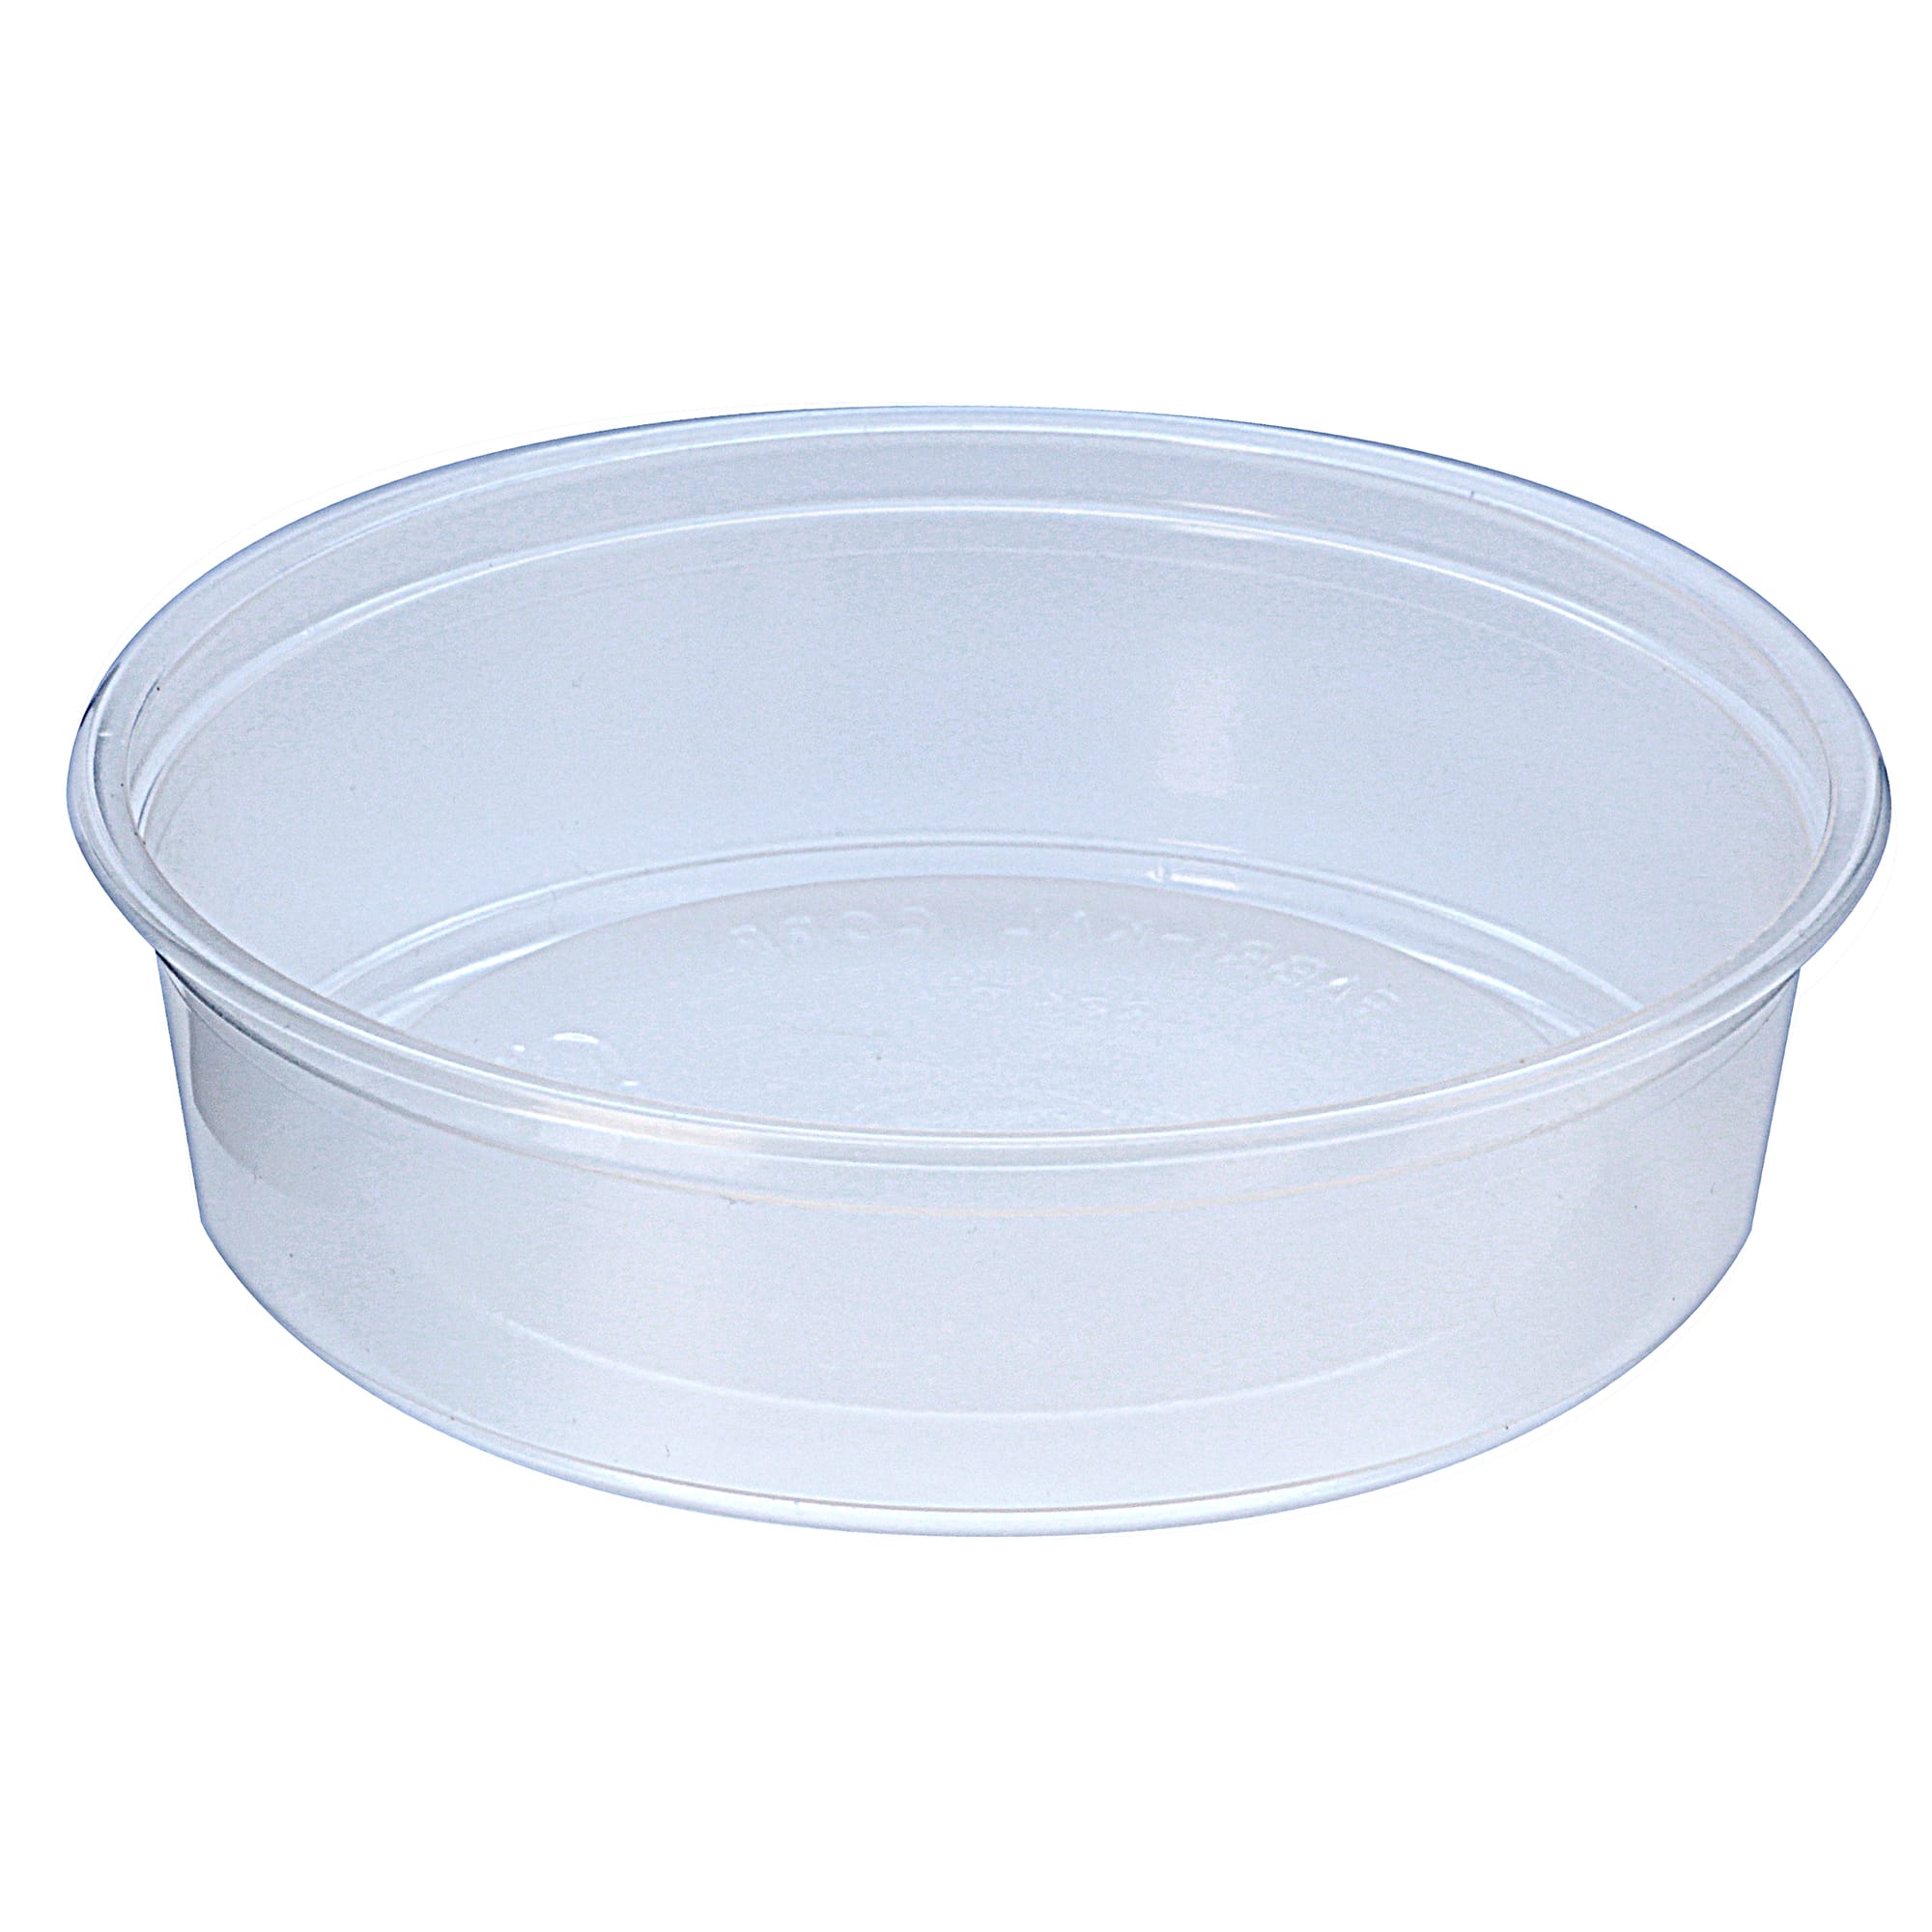 Fabri-Kal 9501034 Alur Deli Container 16 Oz, Clear, Polyethylene  Terephthalate, Recyclable, Round, (500 per Case)